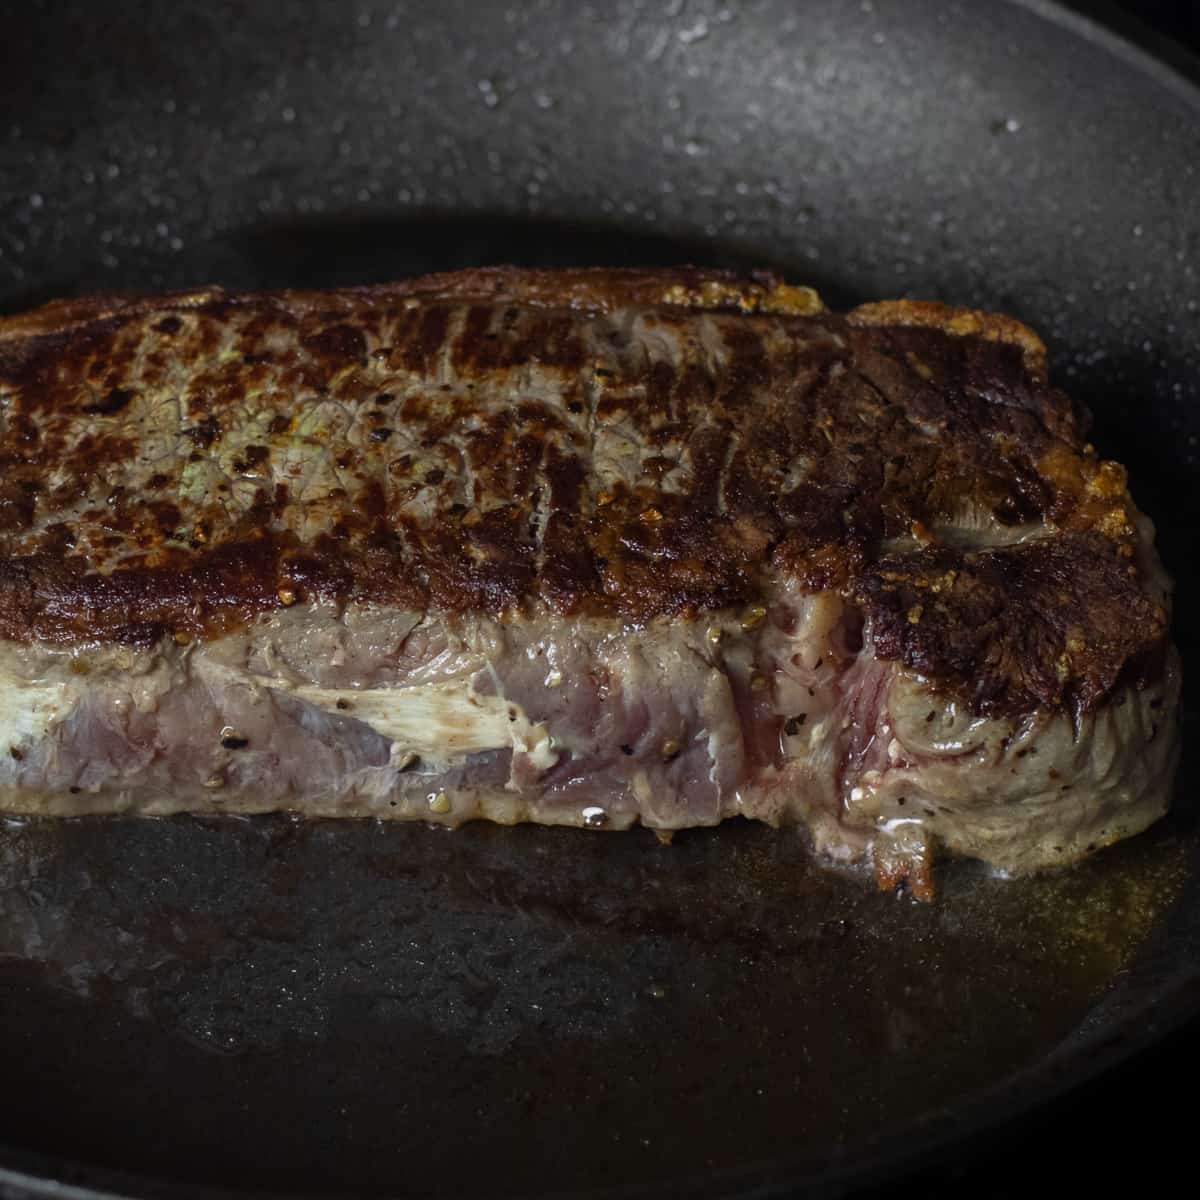 Steak searing in a frying pan with brown seared side showing on top.